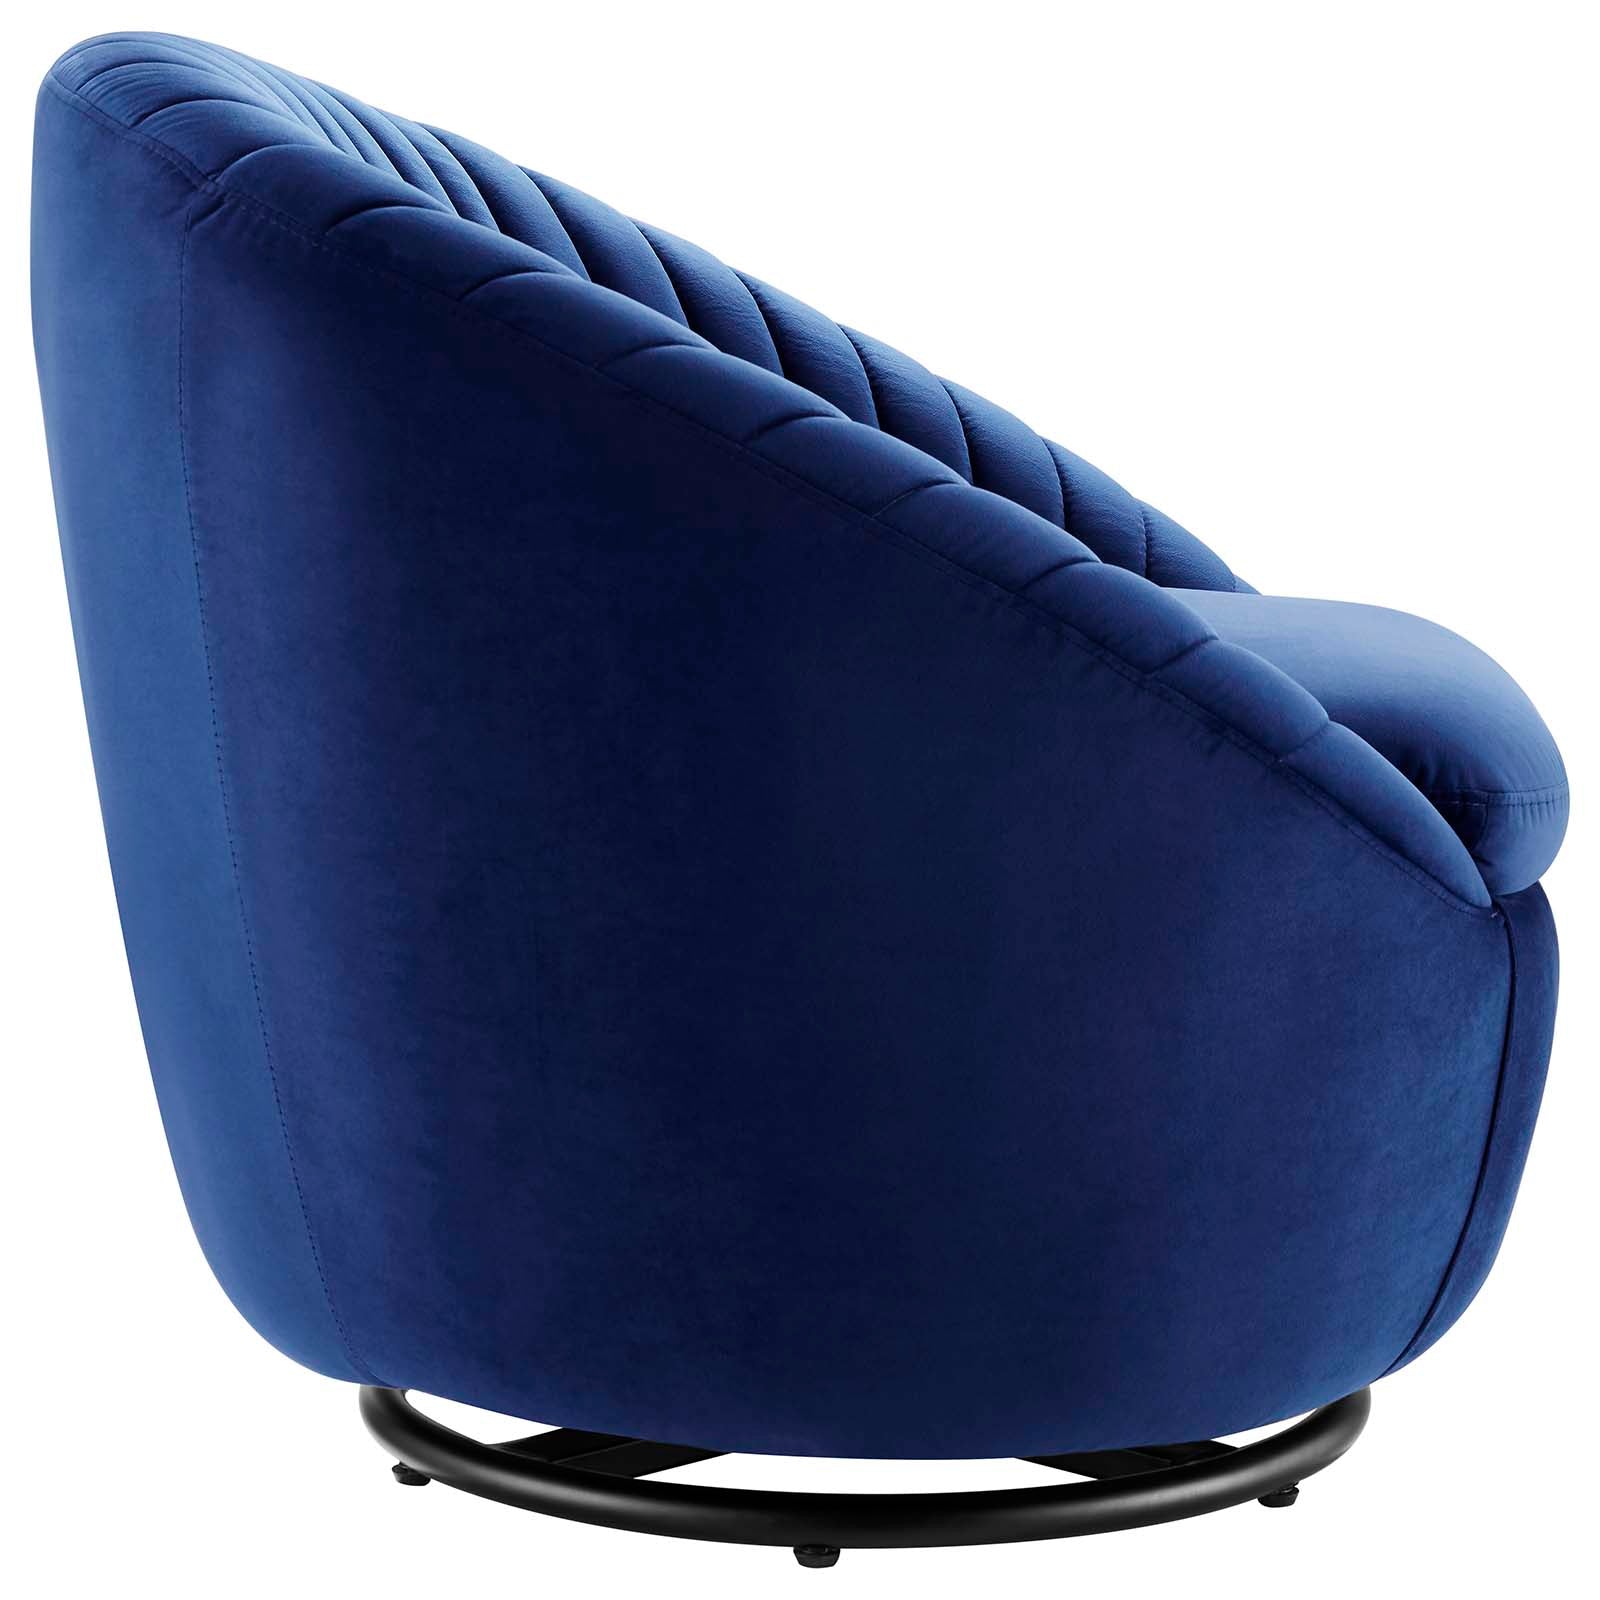 Modway Accent Chairs - Whirr Tufted Performance Velvet Performance Velvet Swivel Chair Black Navy